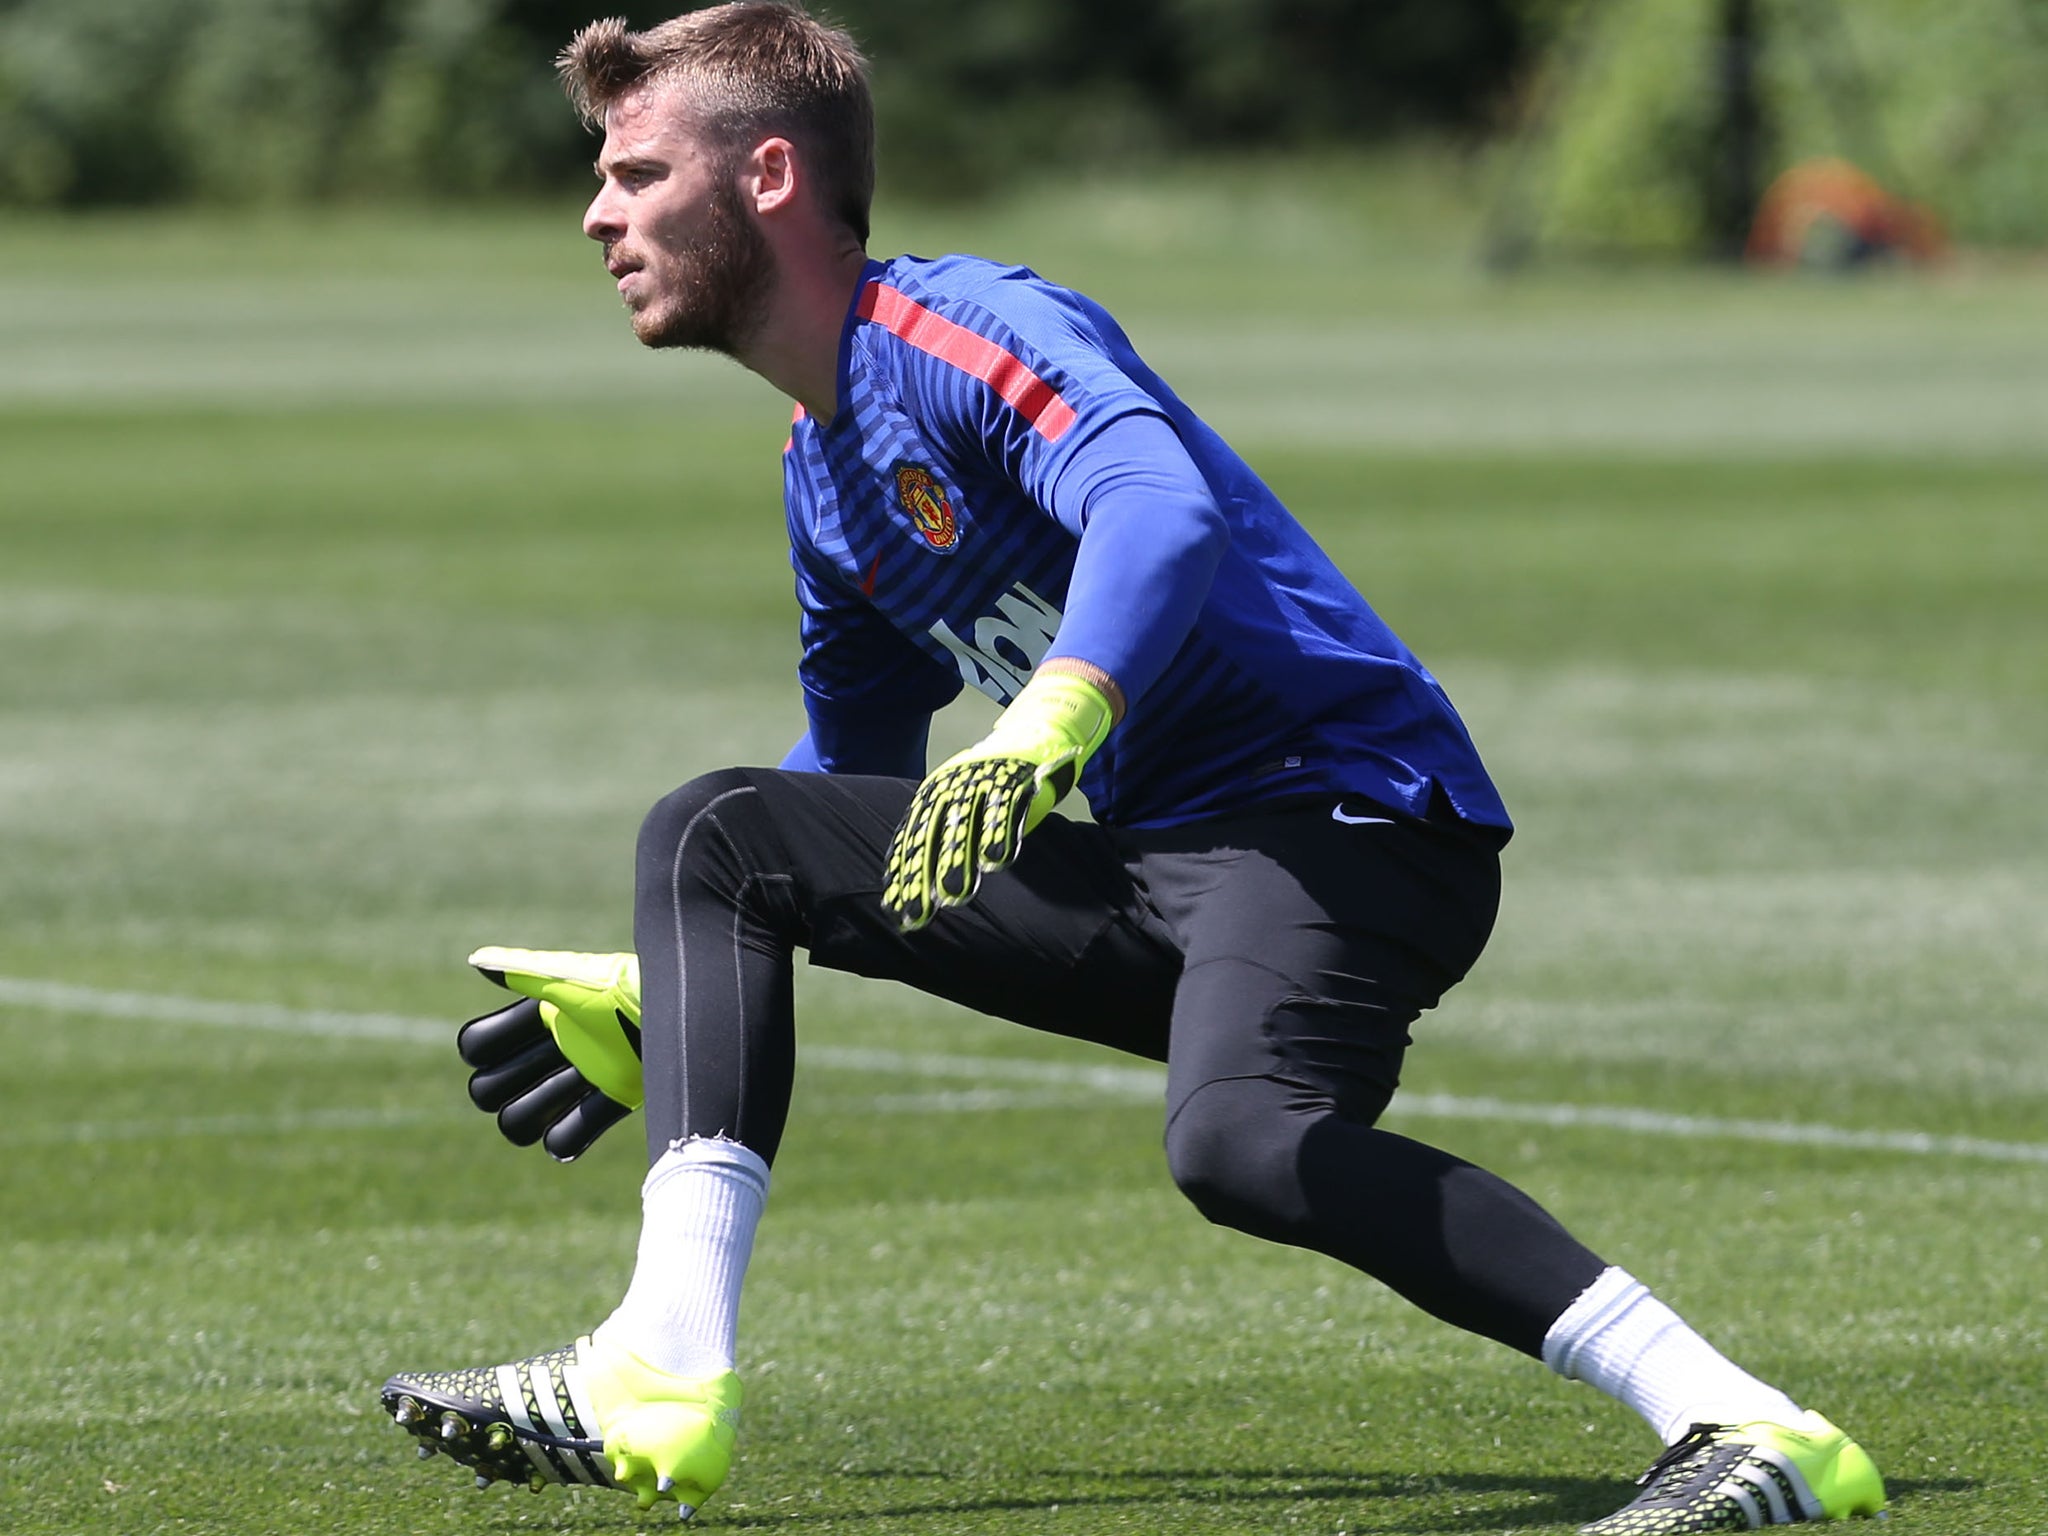 David De Gea in Manchester United training in the US